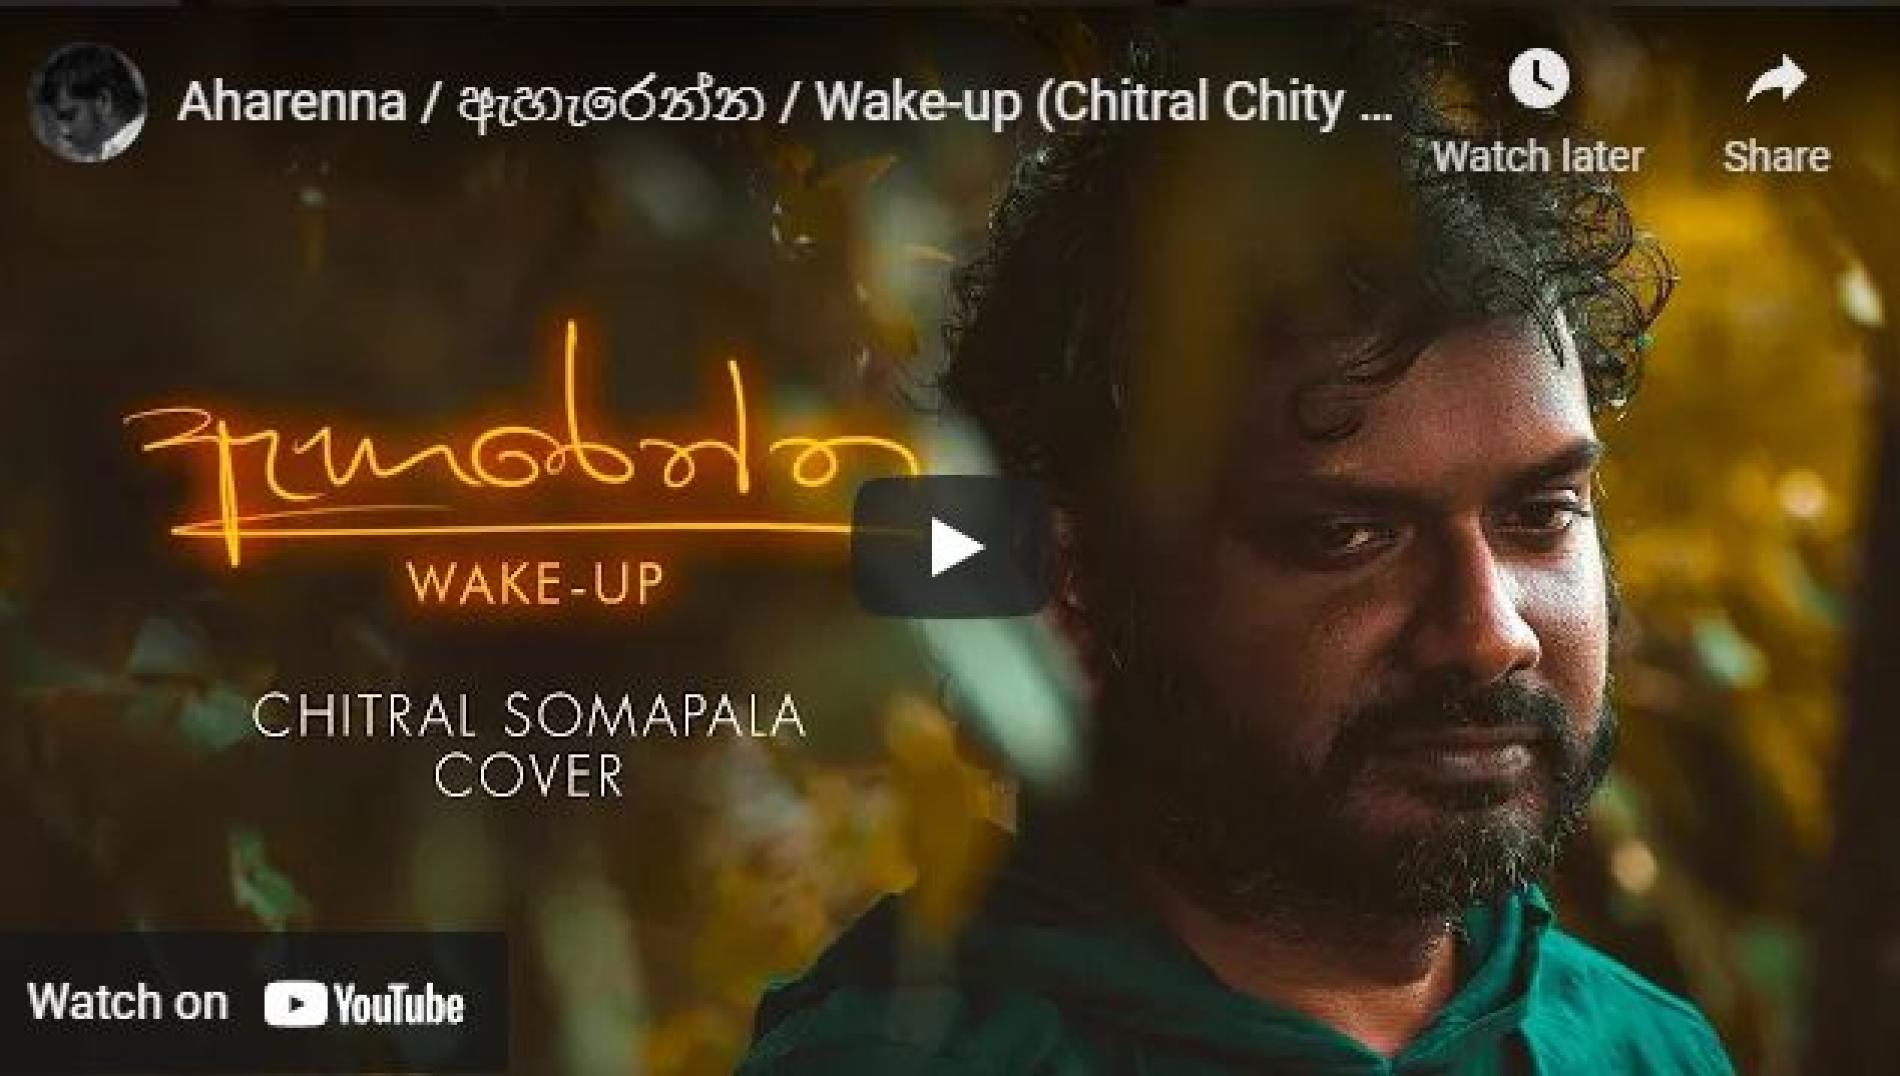 New Music : Aharenna / ඇහැරෙන්න / Wake-up (Chitral Chity Somapala Cover) By Sanjeev Niles